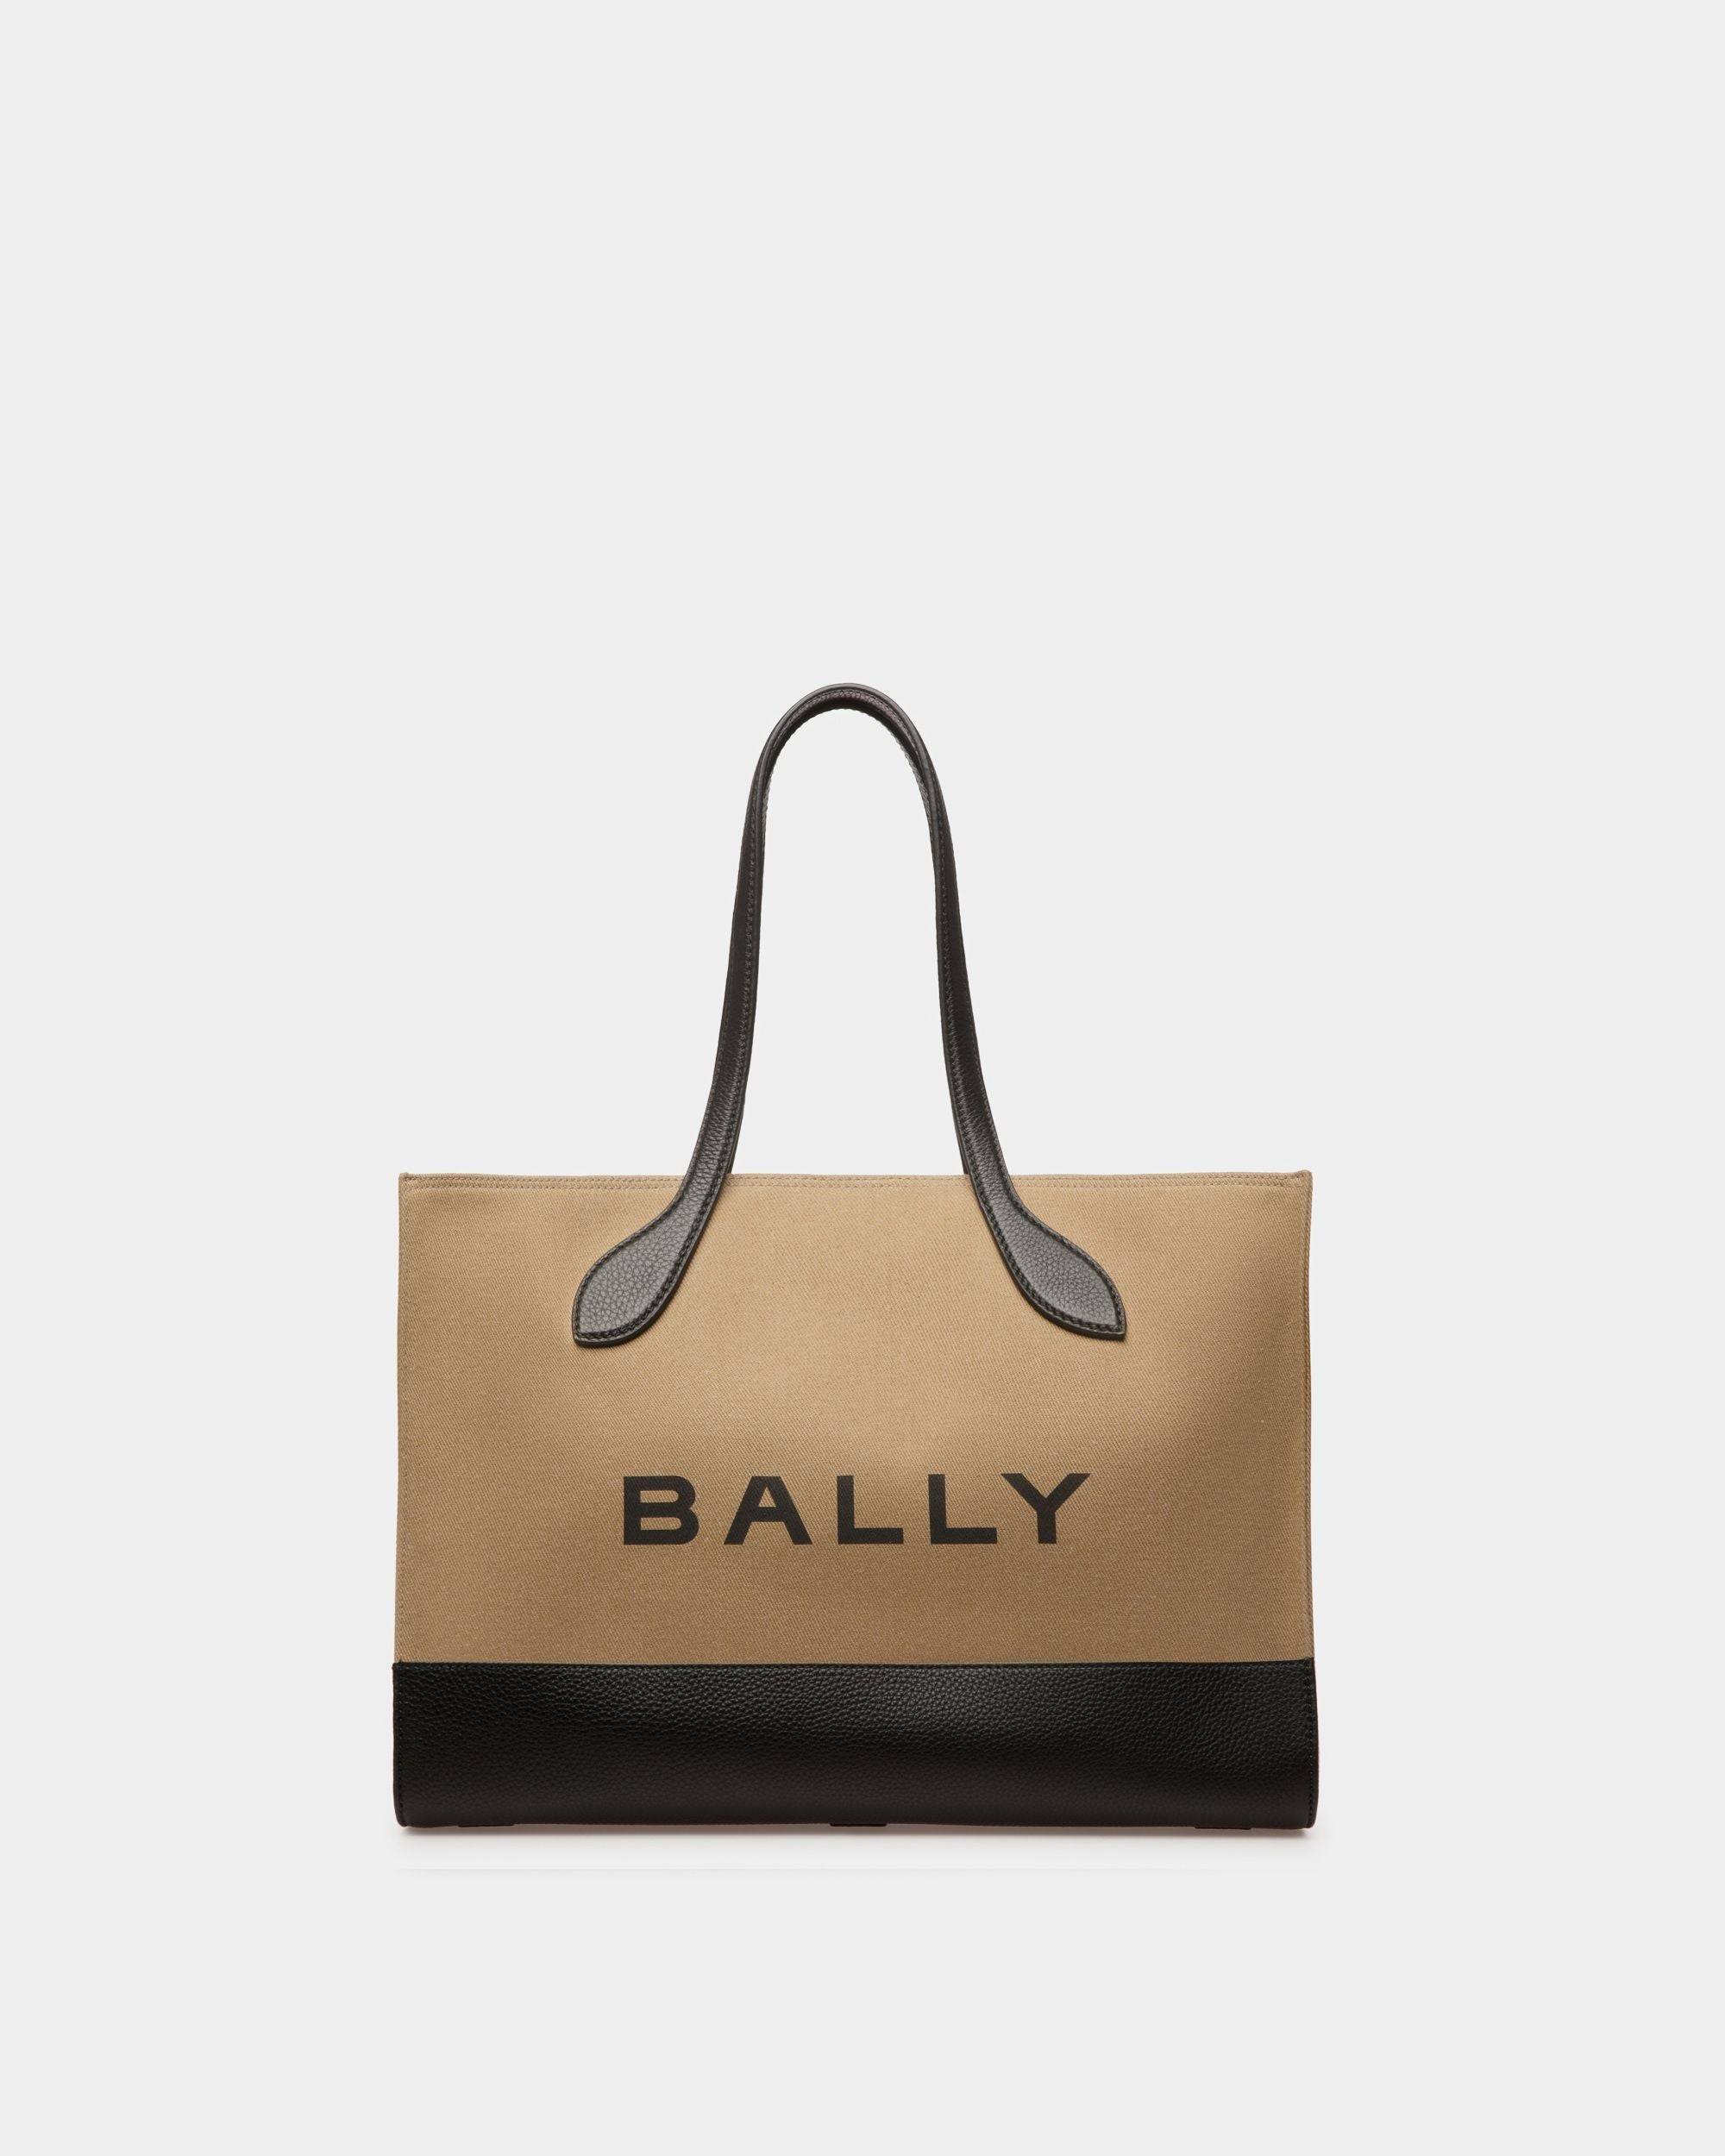 Keep On Ew | Women's Tote Bag | Sand And Black Fabric | Bally | Still Life Front